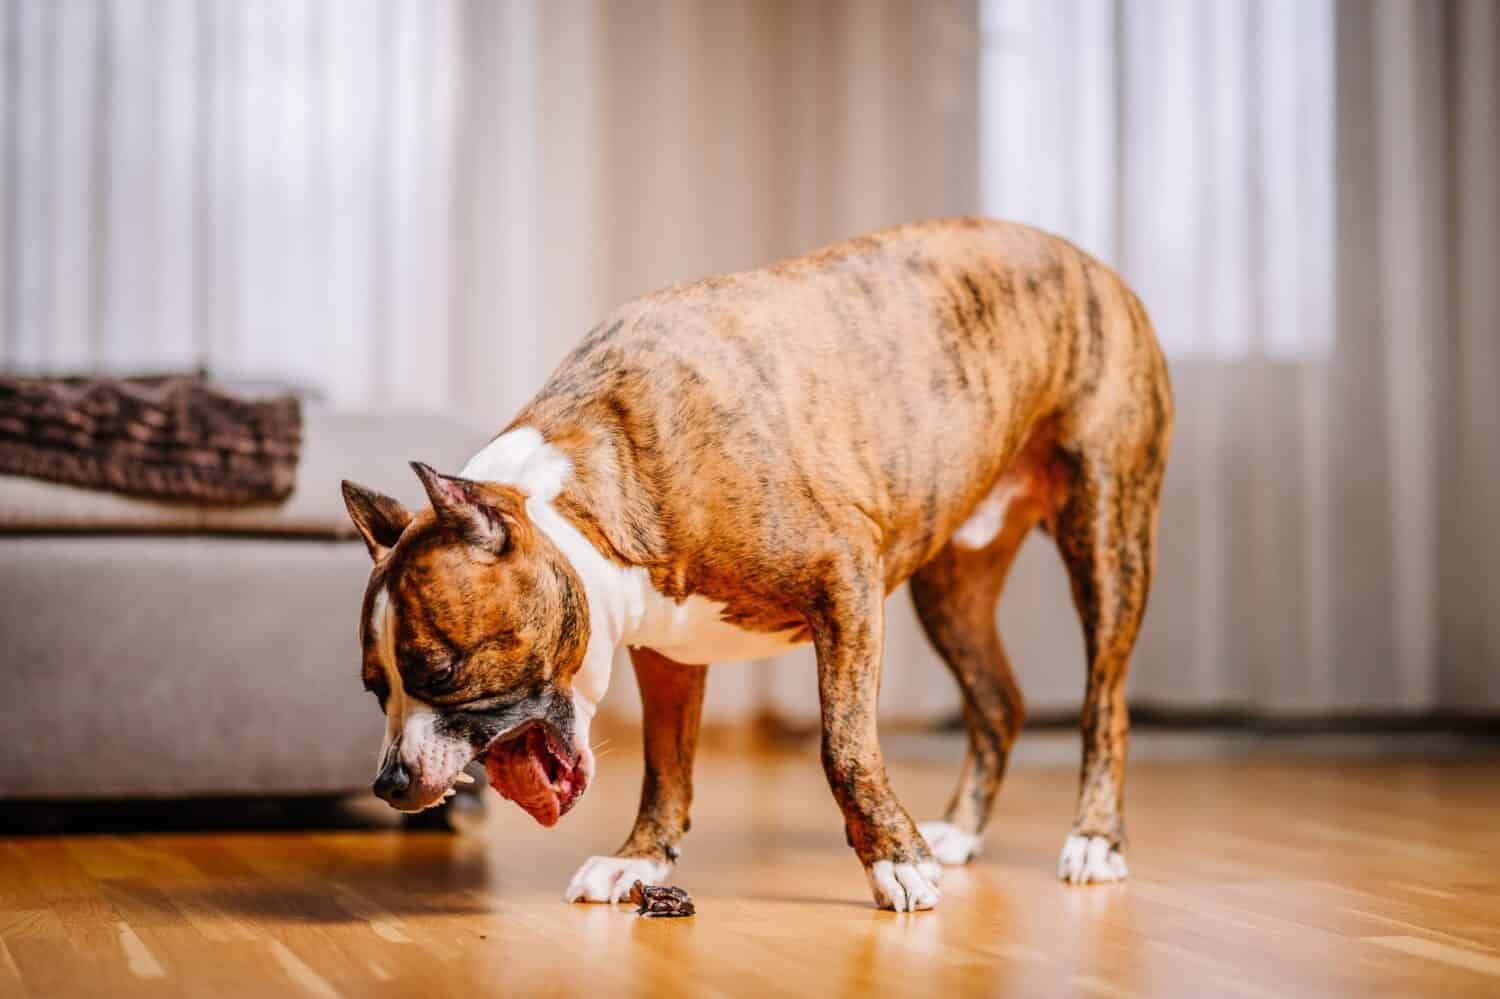 A large Pitbull dog open mouth with a pink tongue standing on the floor  in the home interior. Domestic animal.